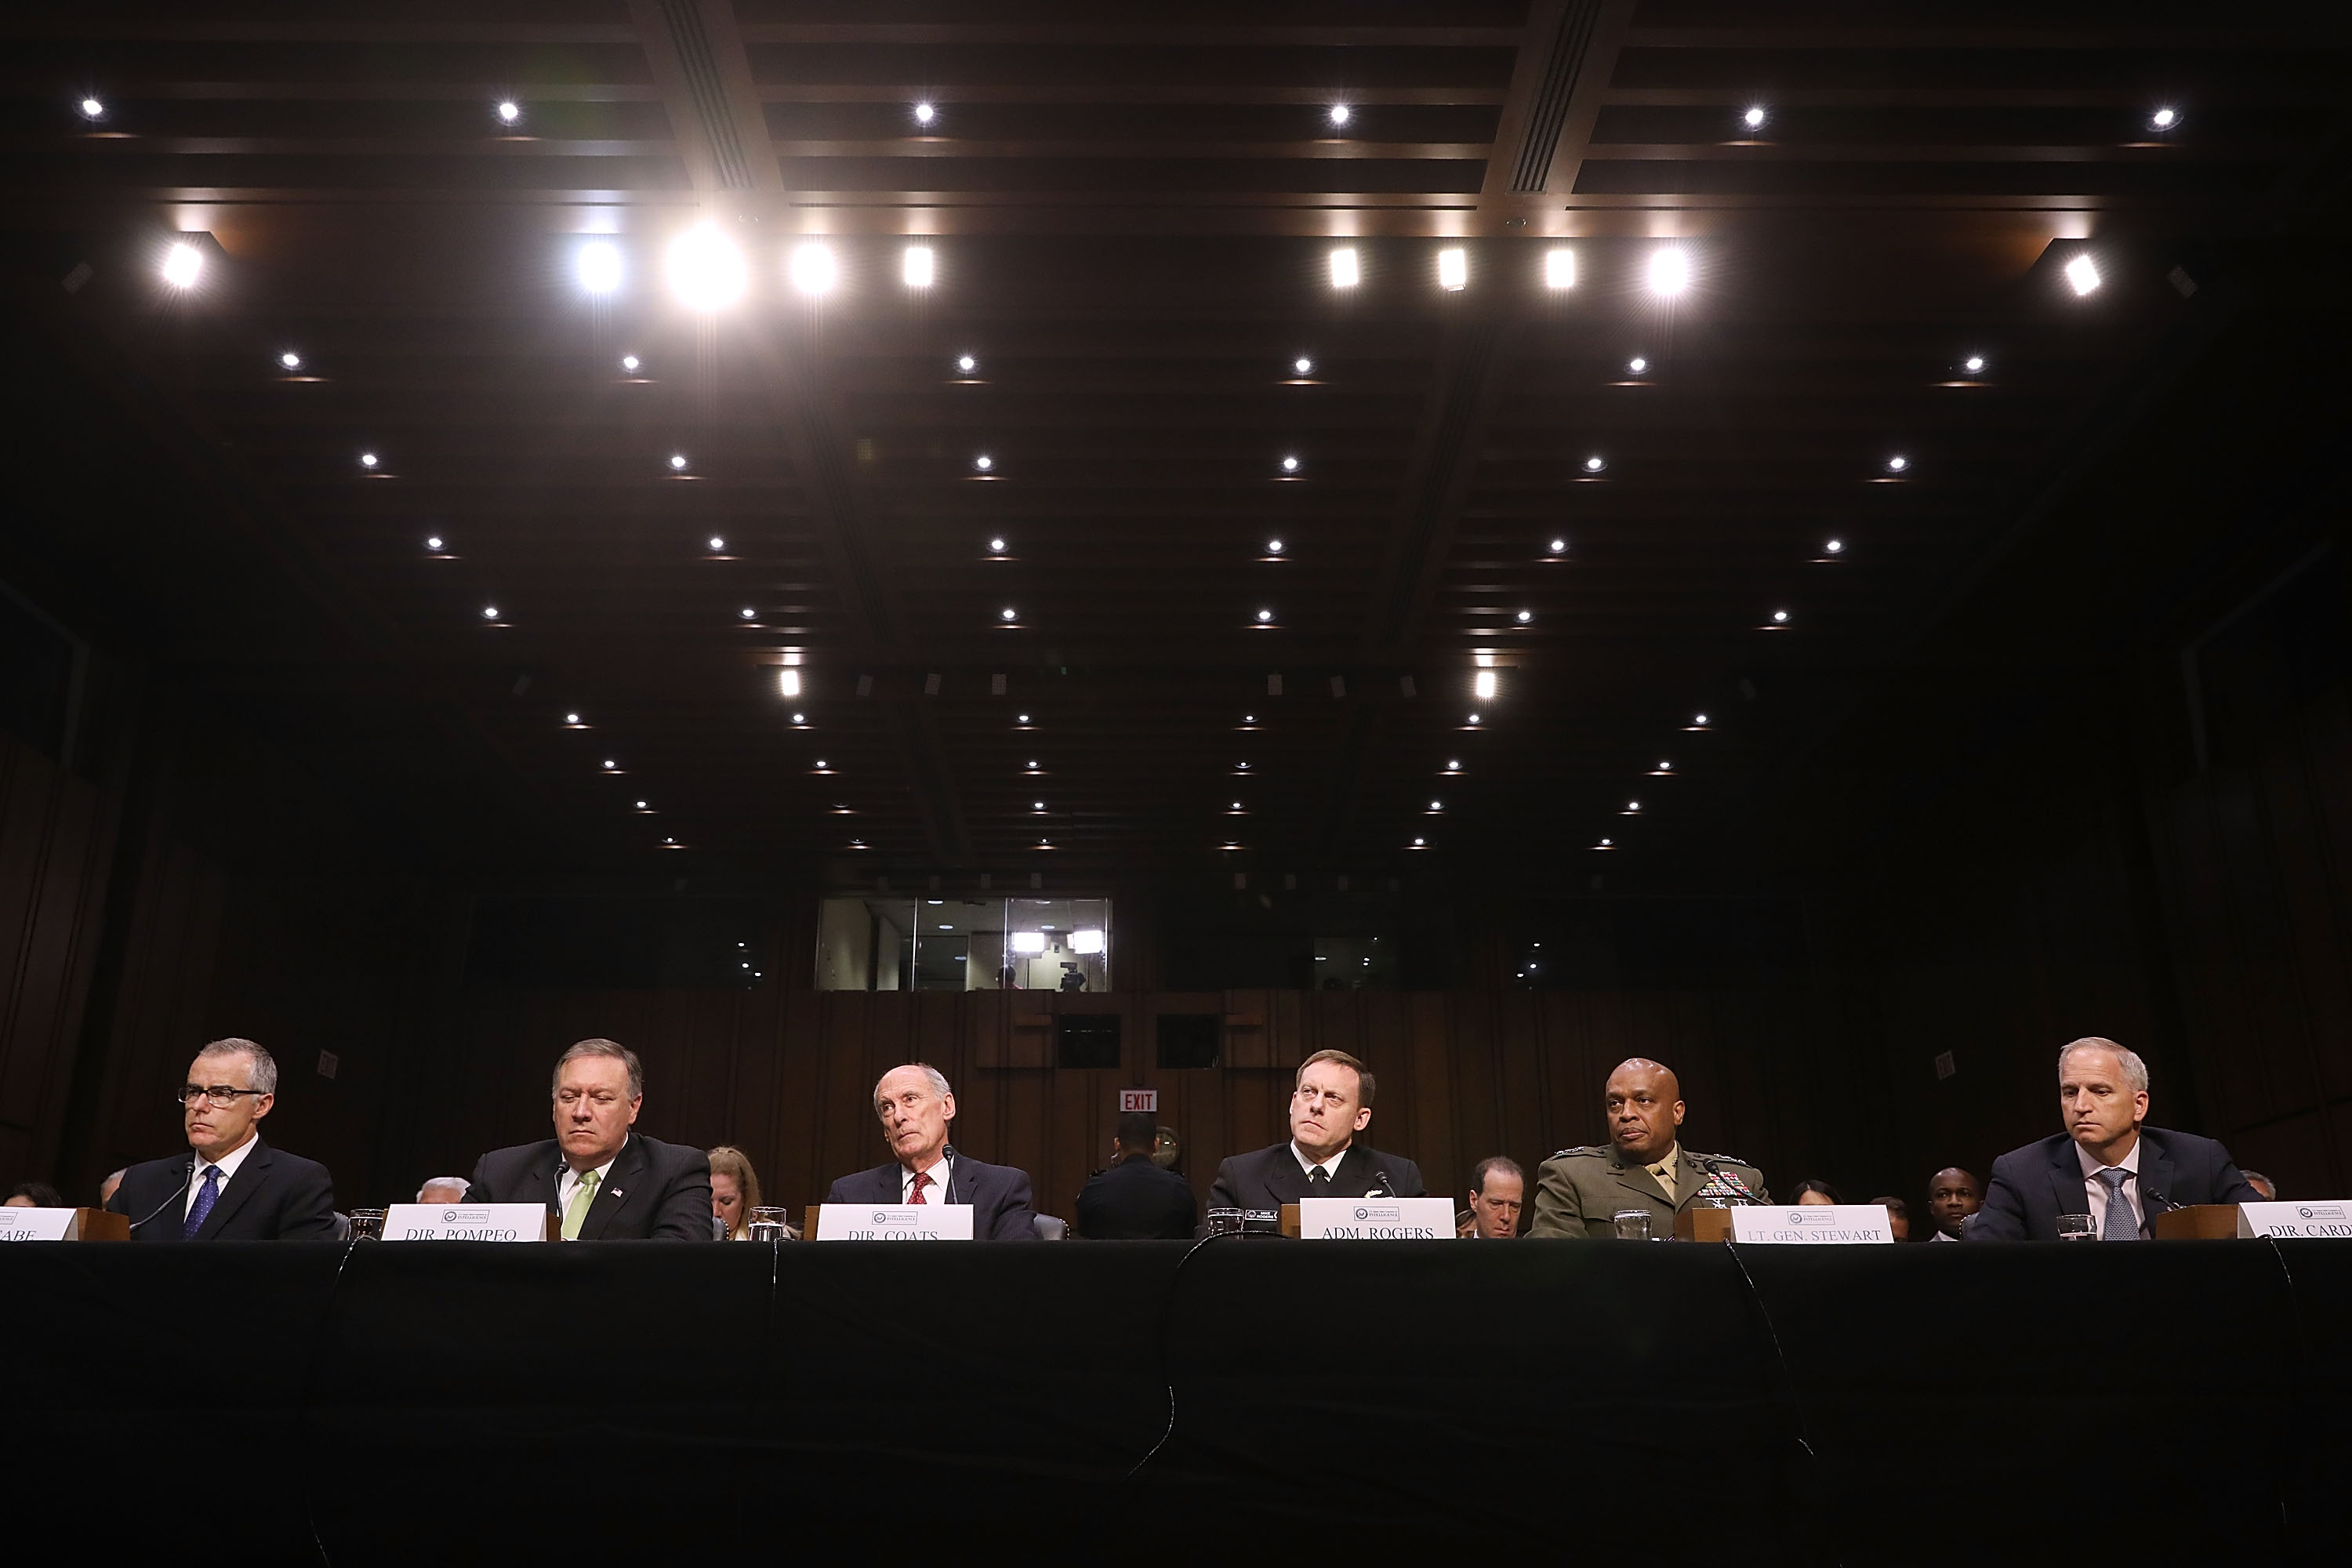 The top brass in the U.S. intelligence community are keeping their mouths shut about software vulnerabilities.